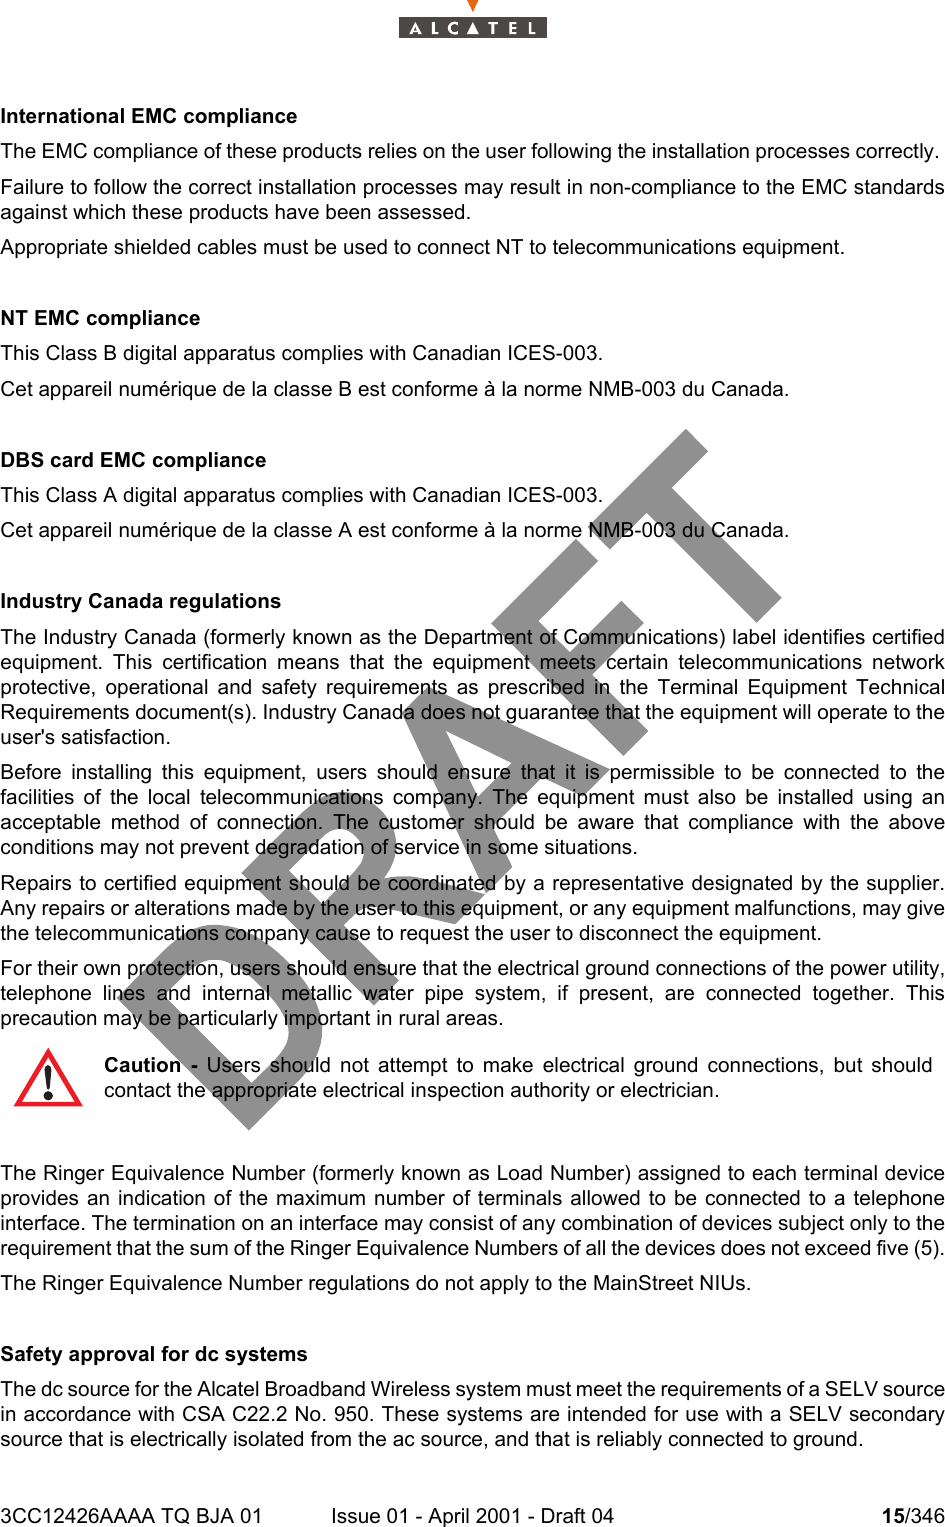 3CC12426AAAA TQ BJA 01 Issue 01 - April 2001 - Draft 04 15/34618International EMC complianceThe EMC compliance of these products relies on the user following the installation processes correctly. Failure to follow the correct installation processes may result in non-compliance to the EMC standardsagainst which these products have been assessed.Appropriate shielded cables must be used to connect NT to telecommunications equipment.NT EMC complianceThis Class B digital apparatus complies with Canadian ICES-003. Cet appareil numérique de la classe B est conforme à la norme NMB-003 du Canada.DBS card EMC complianceThis Class A digital apparatus complies with Canadian ICES-003. Cet appareil numérique de la classe A est conforme à la norme NMB-003 du Canada.Industry Canada regulationsThe Industry Canada (formerly known as the Department of Communications) label identifies certifiedequipment. This certification means that the equipment meets certain telecommunications networkprotective, operational and safety requirements as prescribed in the Terminal Equipment TechnicalRequirements document(s). Industry Canada does not guarantee that the equipment will operate to theuser&apos;s satisfaction.Before installing this equipment, users should ensure that it is permissible to be connected to thefacilities of the local telecommunications company. The equipment must also be installed using anacceptable method of connection. The customer should be aware that compliance with the aboveconditions may not prevent degradation of service in some situations. Repairs to certified equipment should be coordinated by a representative designated by the supplier.Any repairs or alterations made by the user to this equipment, or any equipment malfunctions, may givethe telecommunications company cause to request the user to disconnect the equipment.For their own protection, users should ensure that the electrical ground connections of the power utility,telephone lines and internal metallic water pipe system, if present, are connected together. Thisprecaution may be particularly important in rural areas.The Ringer Equivalence Number (formerly known as Load Number) assigned to each terminal deviceprovides an indication of the maximum number of terminals allowed to be connected to a telephoneinterface. The termination on an interface may consist of any combination of devices subject only to therequirement that the sum of the Ringer Equivalence Numbers of all the devices does not exceed five (5).The Ringer Equivalence Number regulations do not apply to the MainStreet NIUs.Safety approval for dc systemsThe dc source for the Alcatel Broadband Wireless system must meet the requirements of a SELV sourcein accordance with CSA C22.2 No. 950. These systems are intended for use with a SELV secondarysource that is electrically isolated from the ac source, and that is reliably connected to ground.Caution - Users should not attempt to make electrical ground connections, but shouldcontact the appropriate electrical inspection authority or electrician.